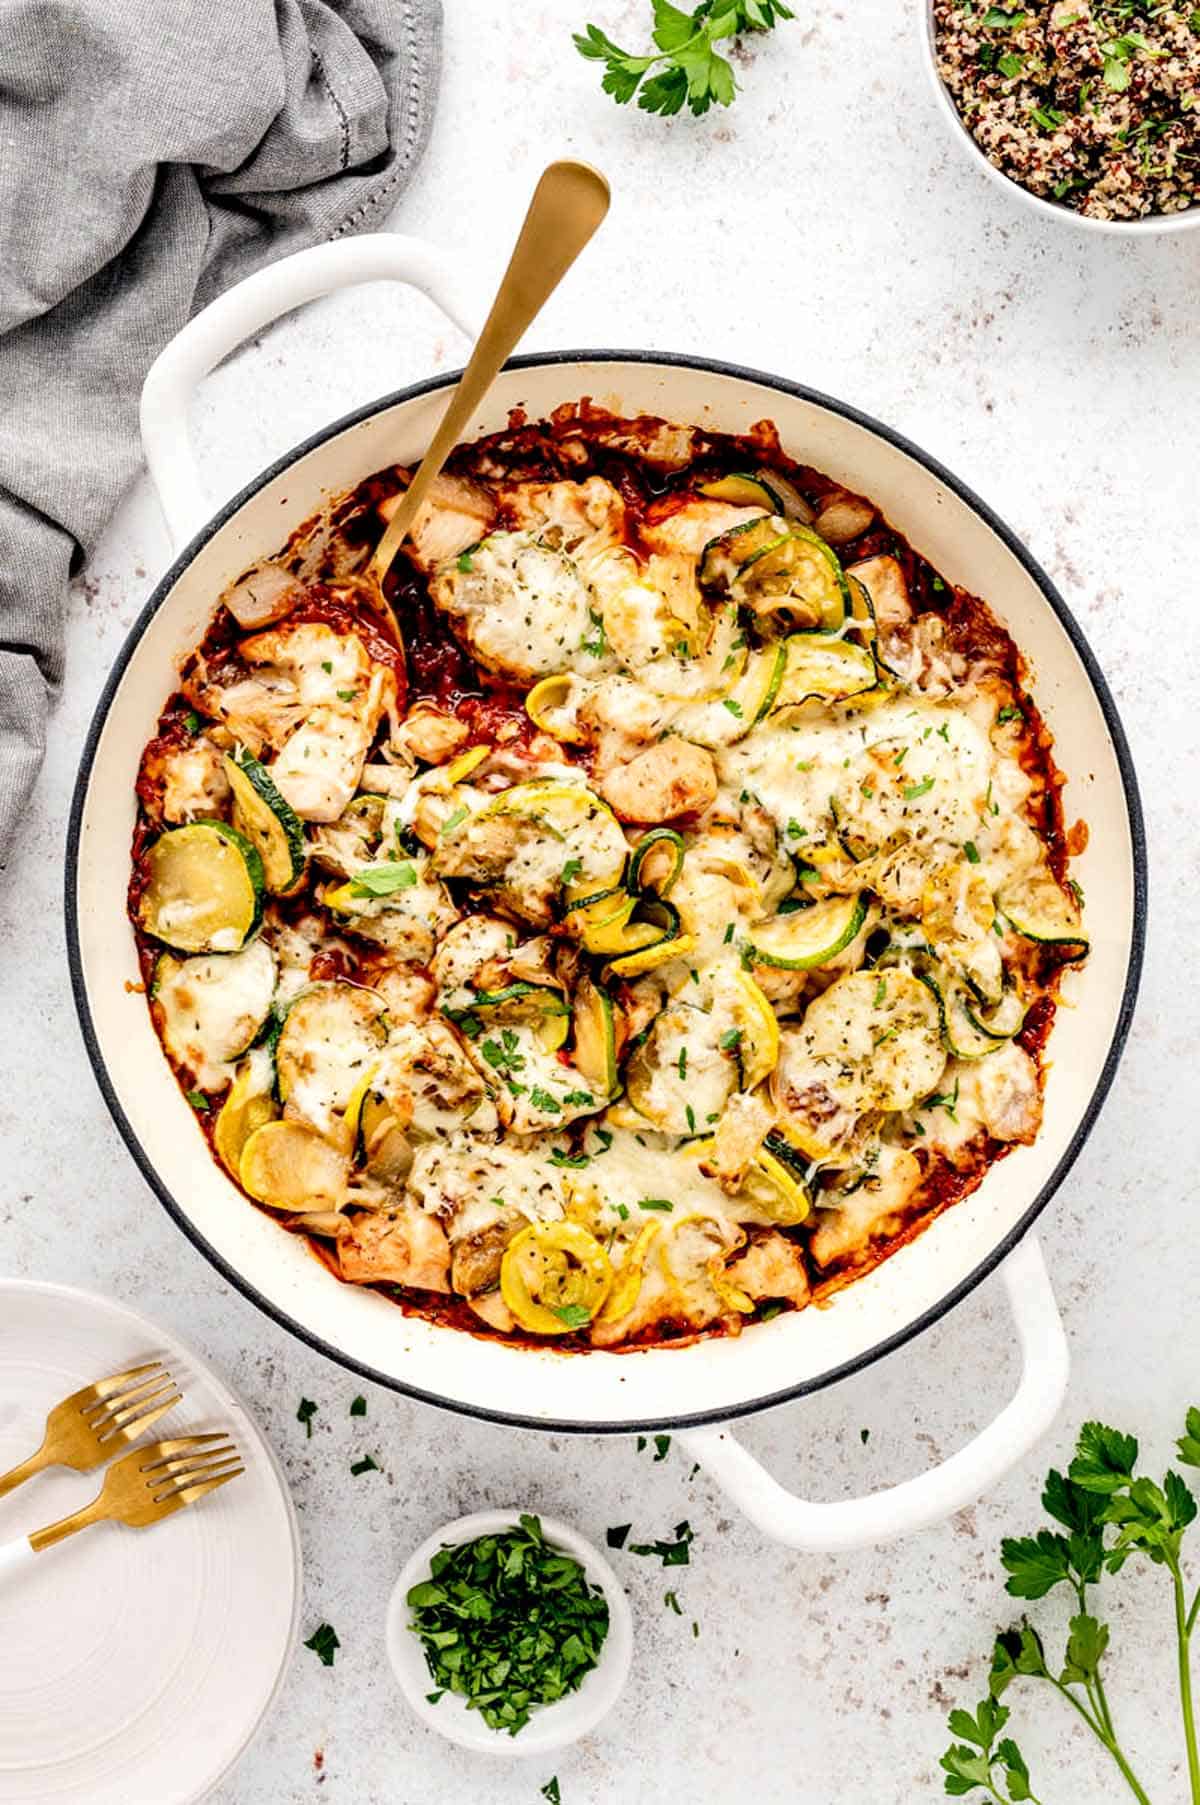 The baked chicken zucchini casserole in a white Dutch oven with a spoon in it.